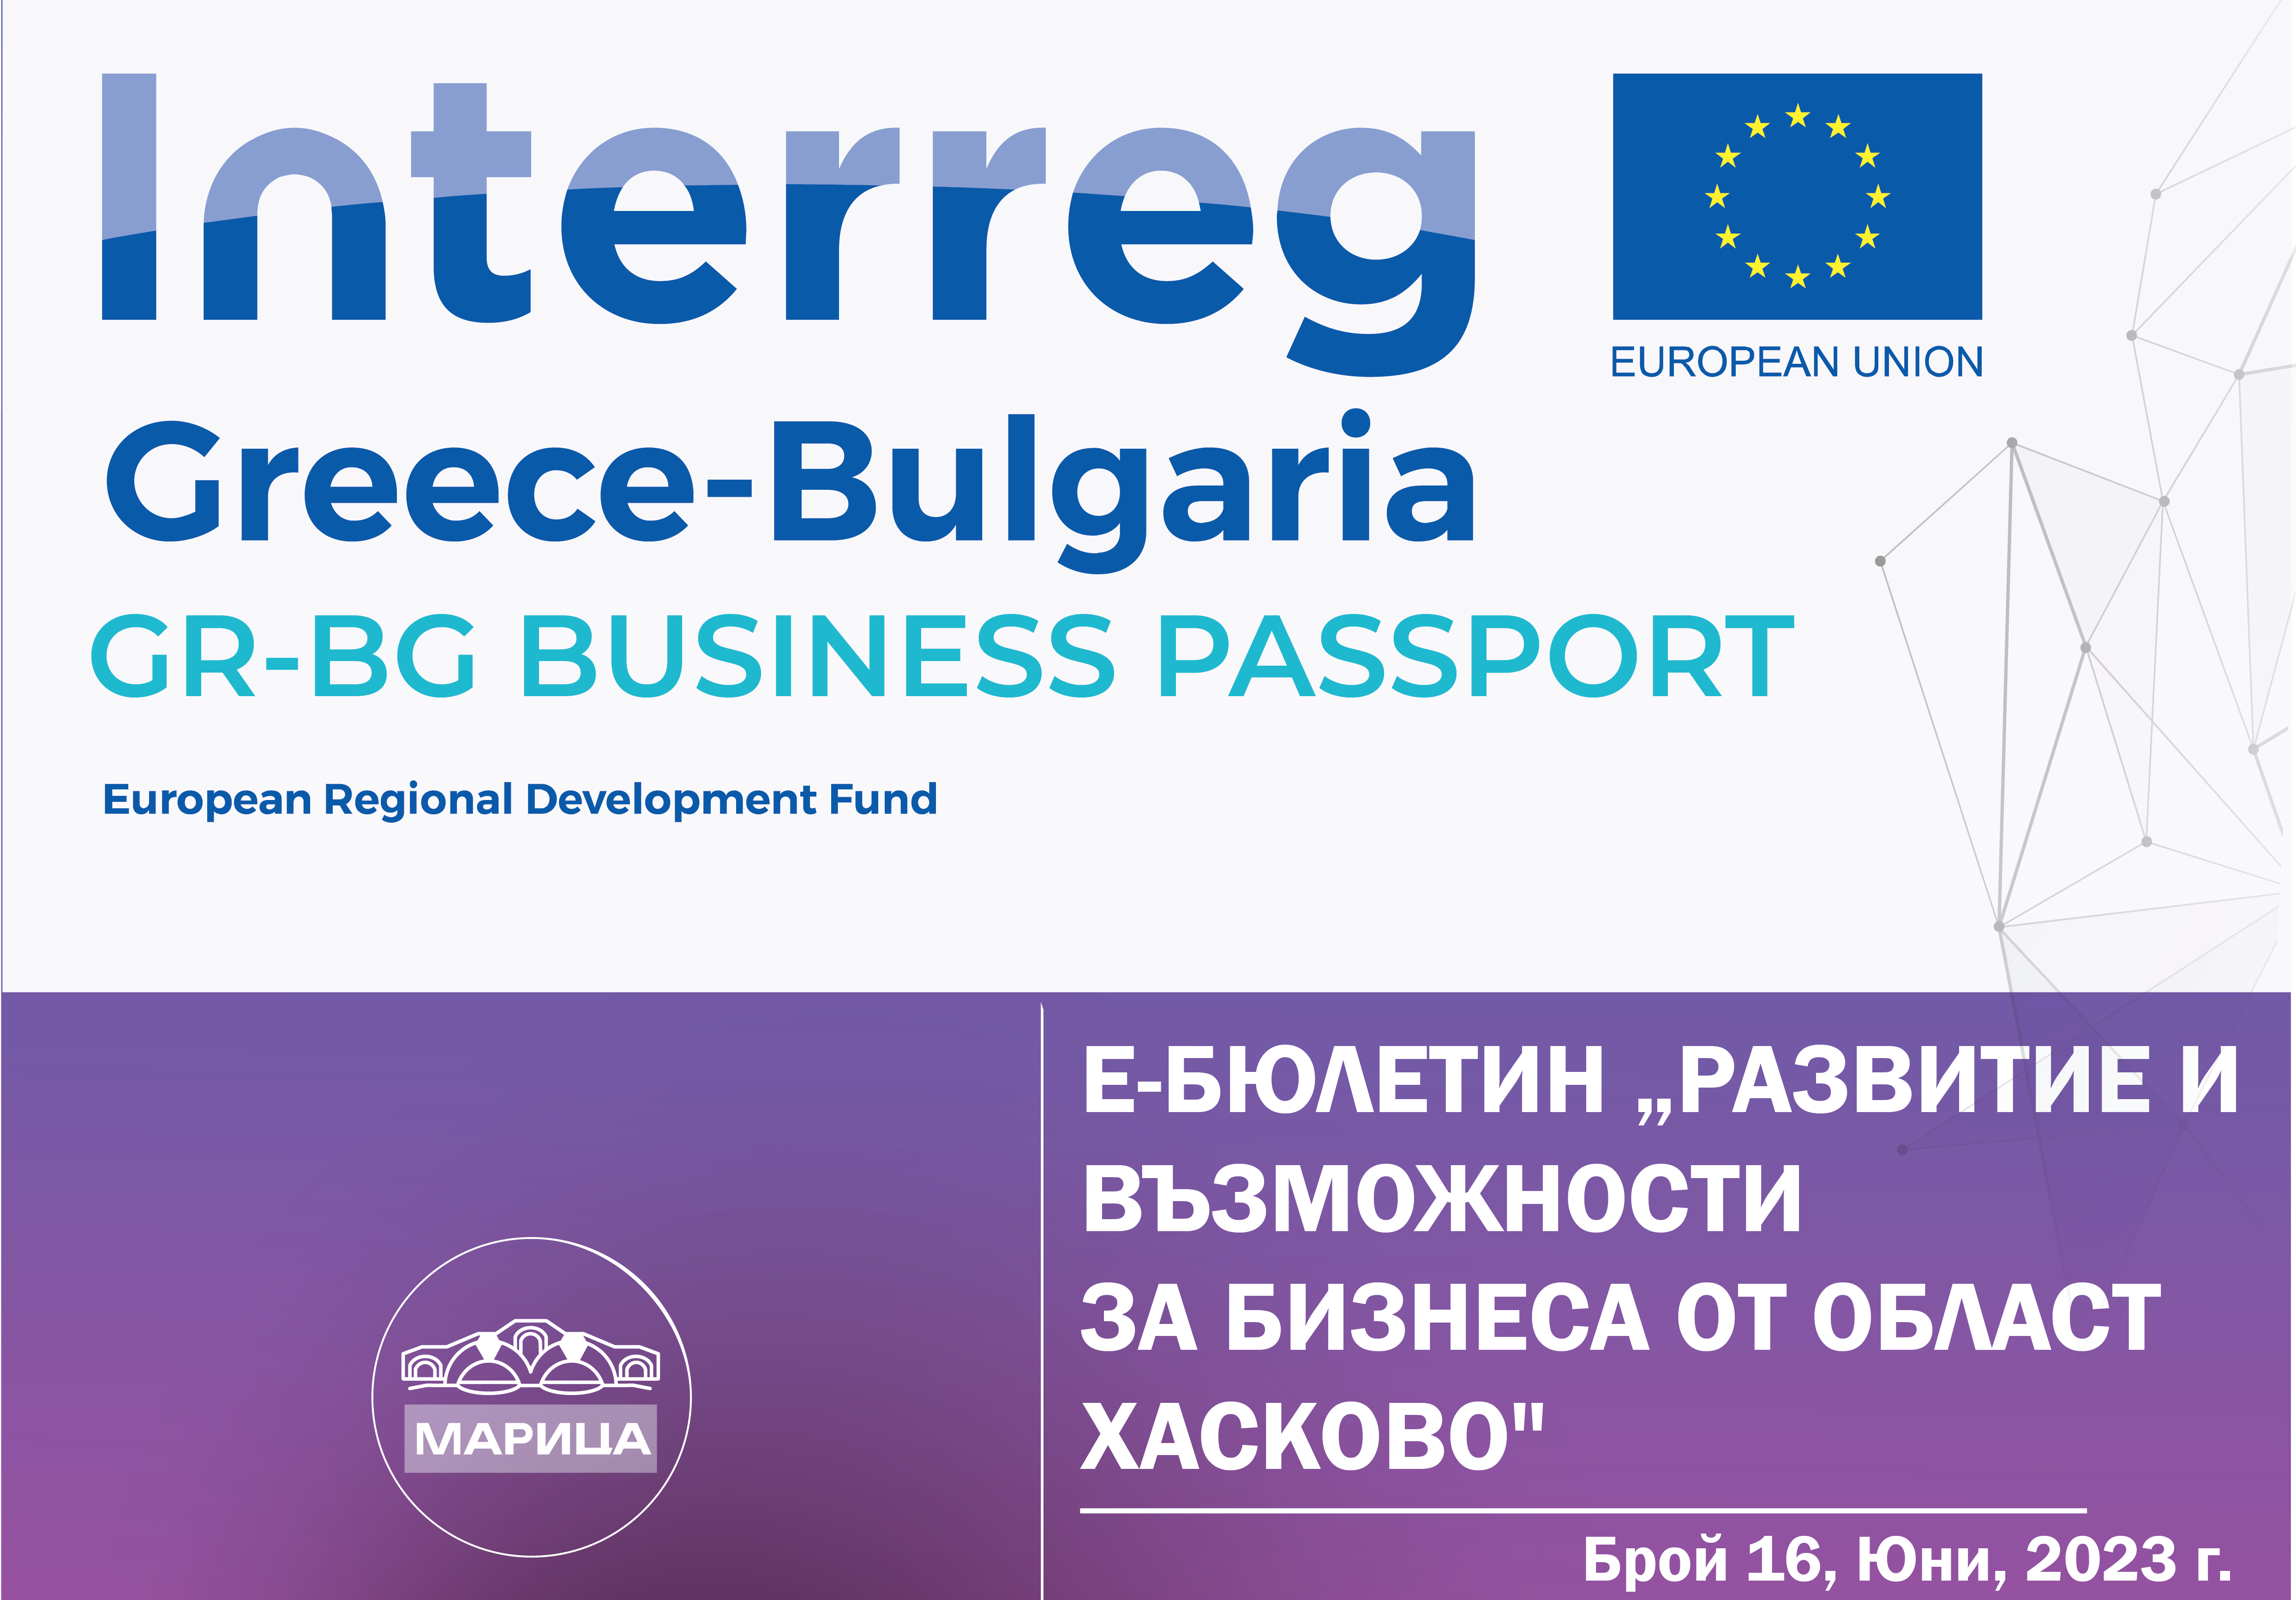 e-newsletter “Development and opportunities for business in the Haskovo region” under a project with the acronym “GR-BG BUSINESS PASSPORT, June, 2023, 16th edition